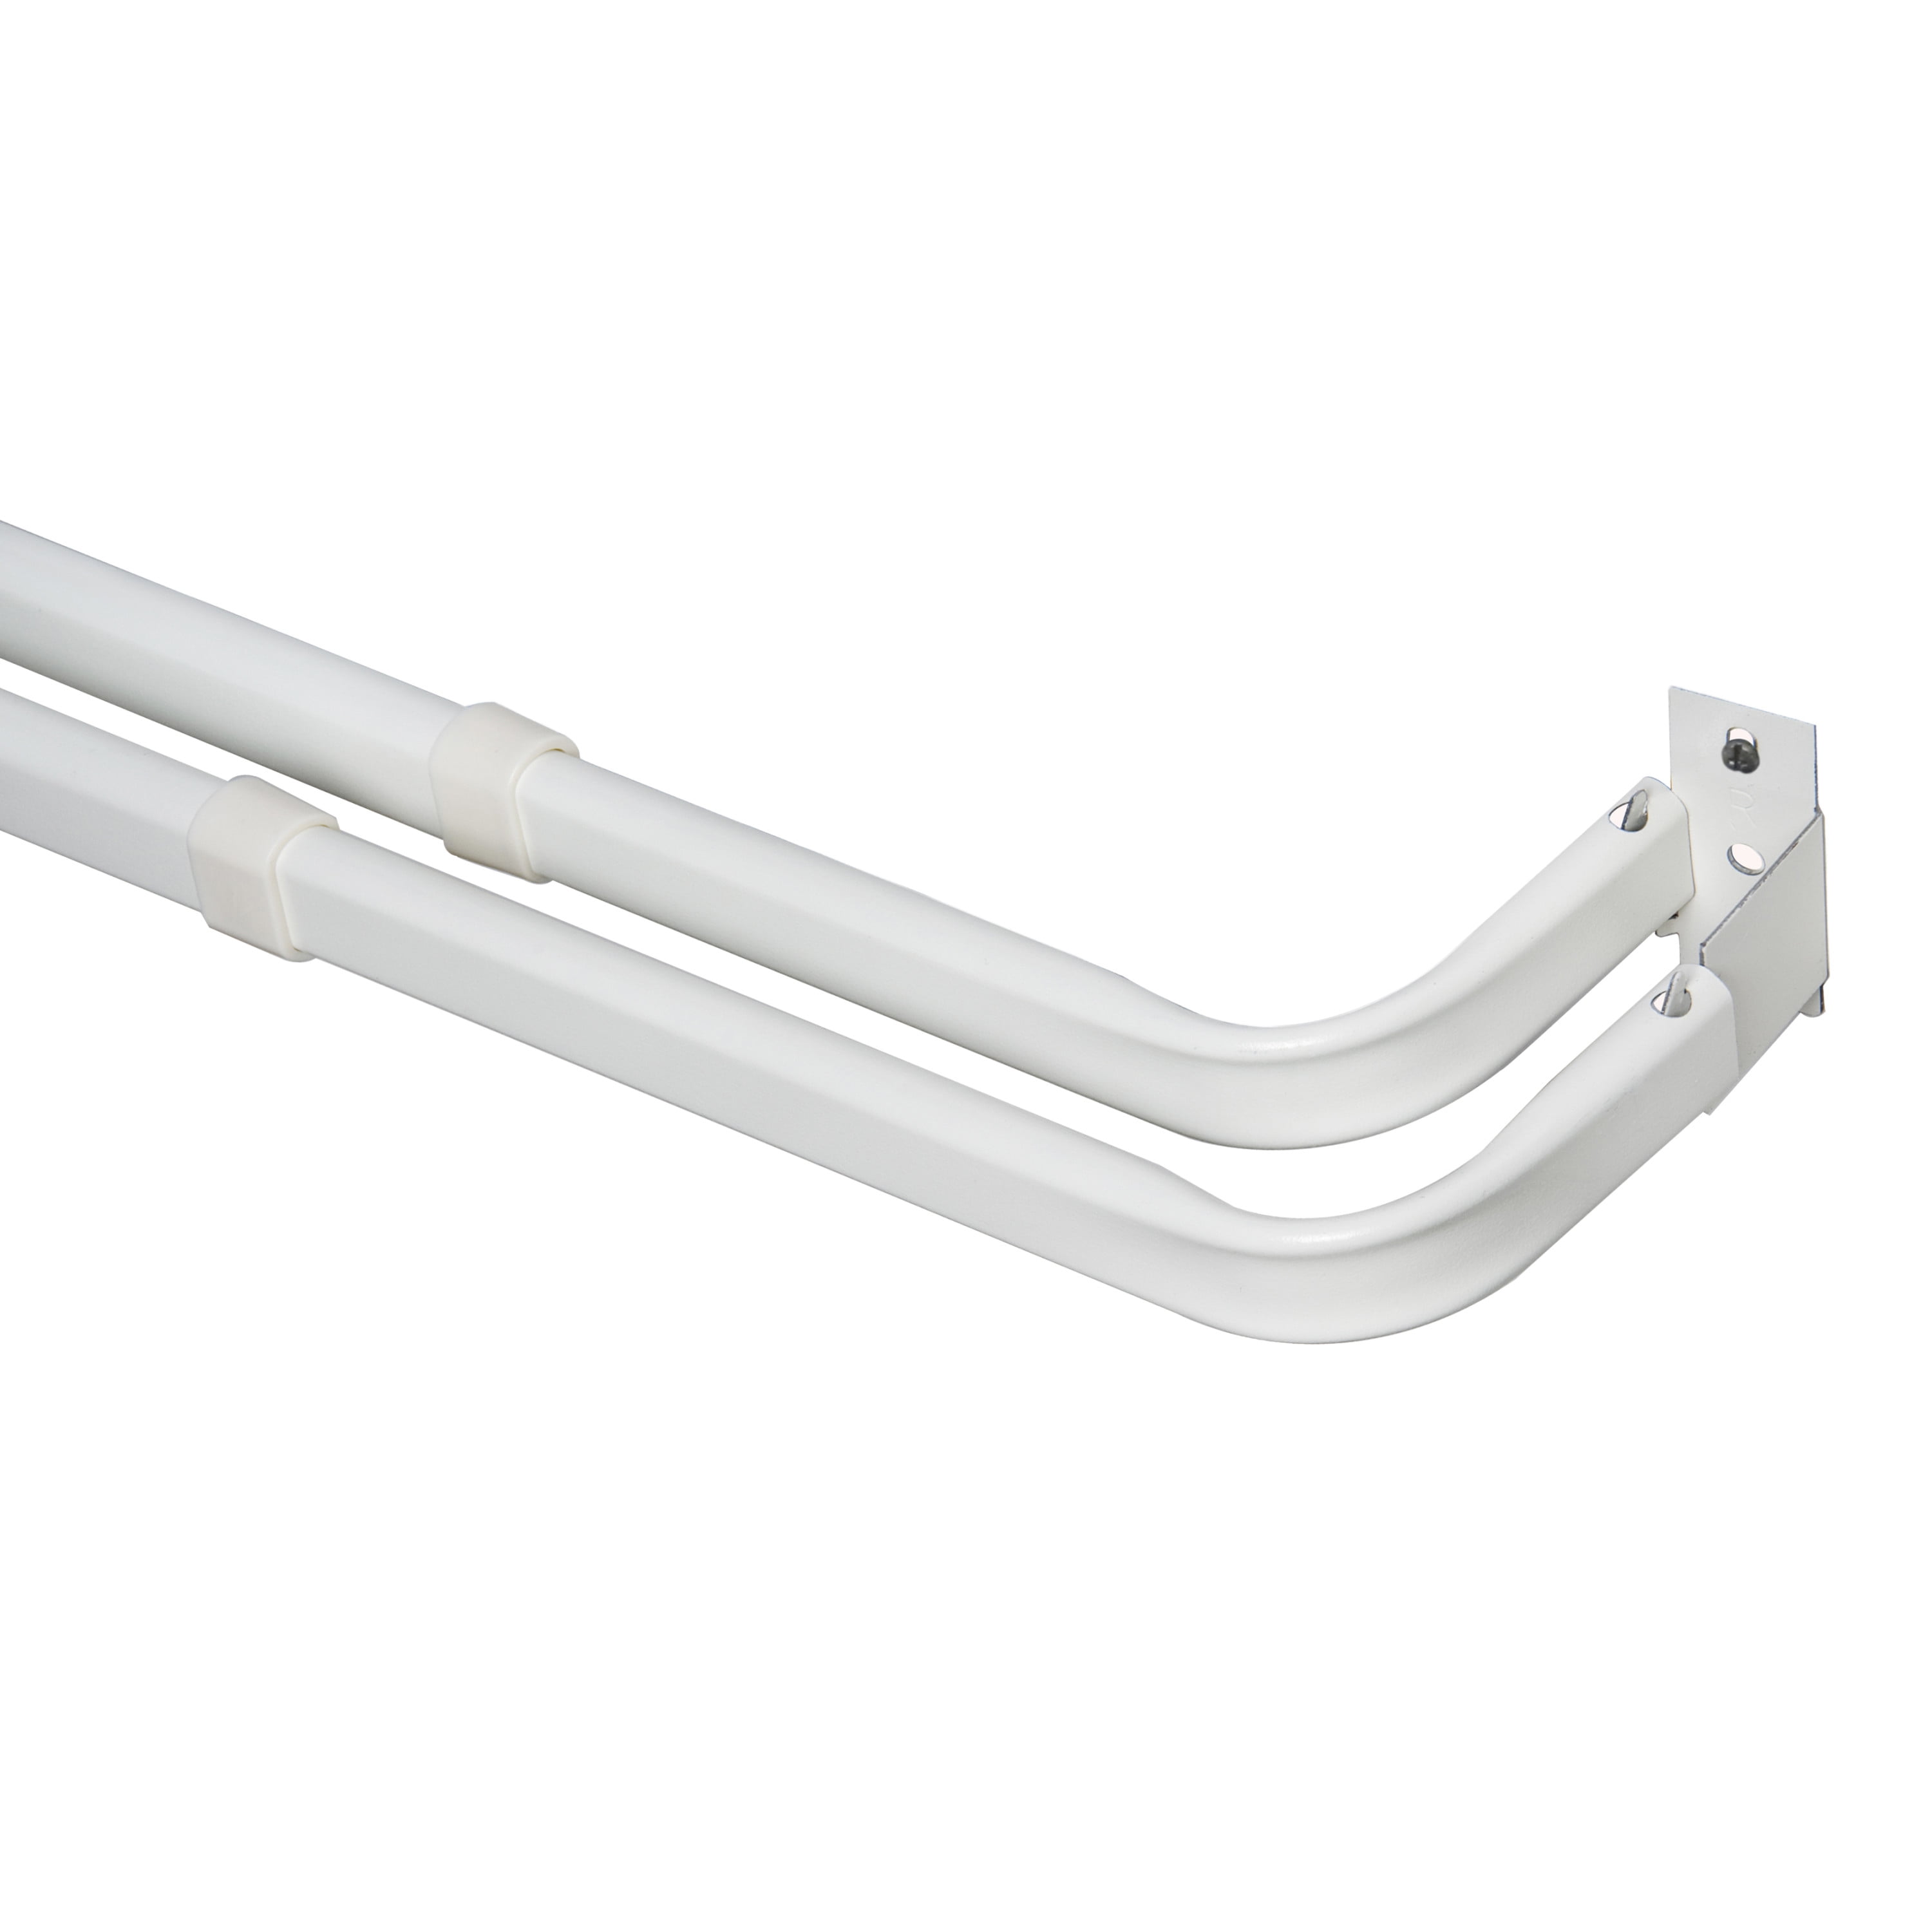 Spring Window Fashions Double Lock Seam Curtain Rod White 48 to 84-Inch Adjustable Width